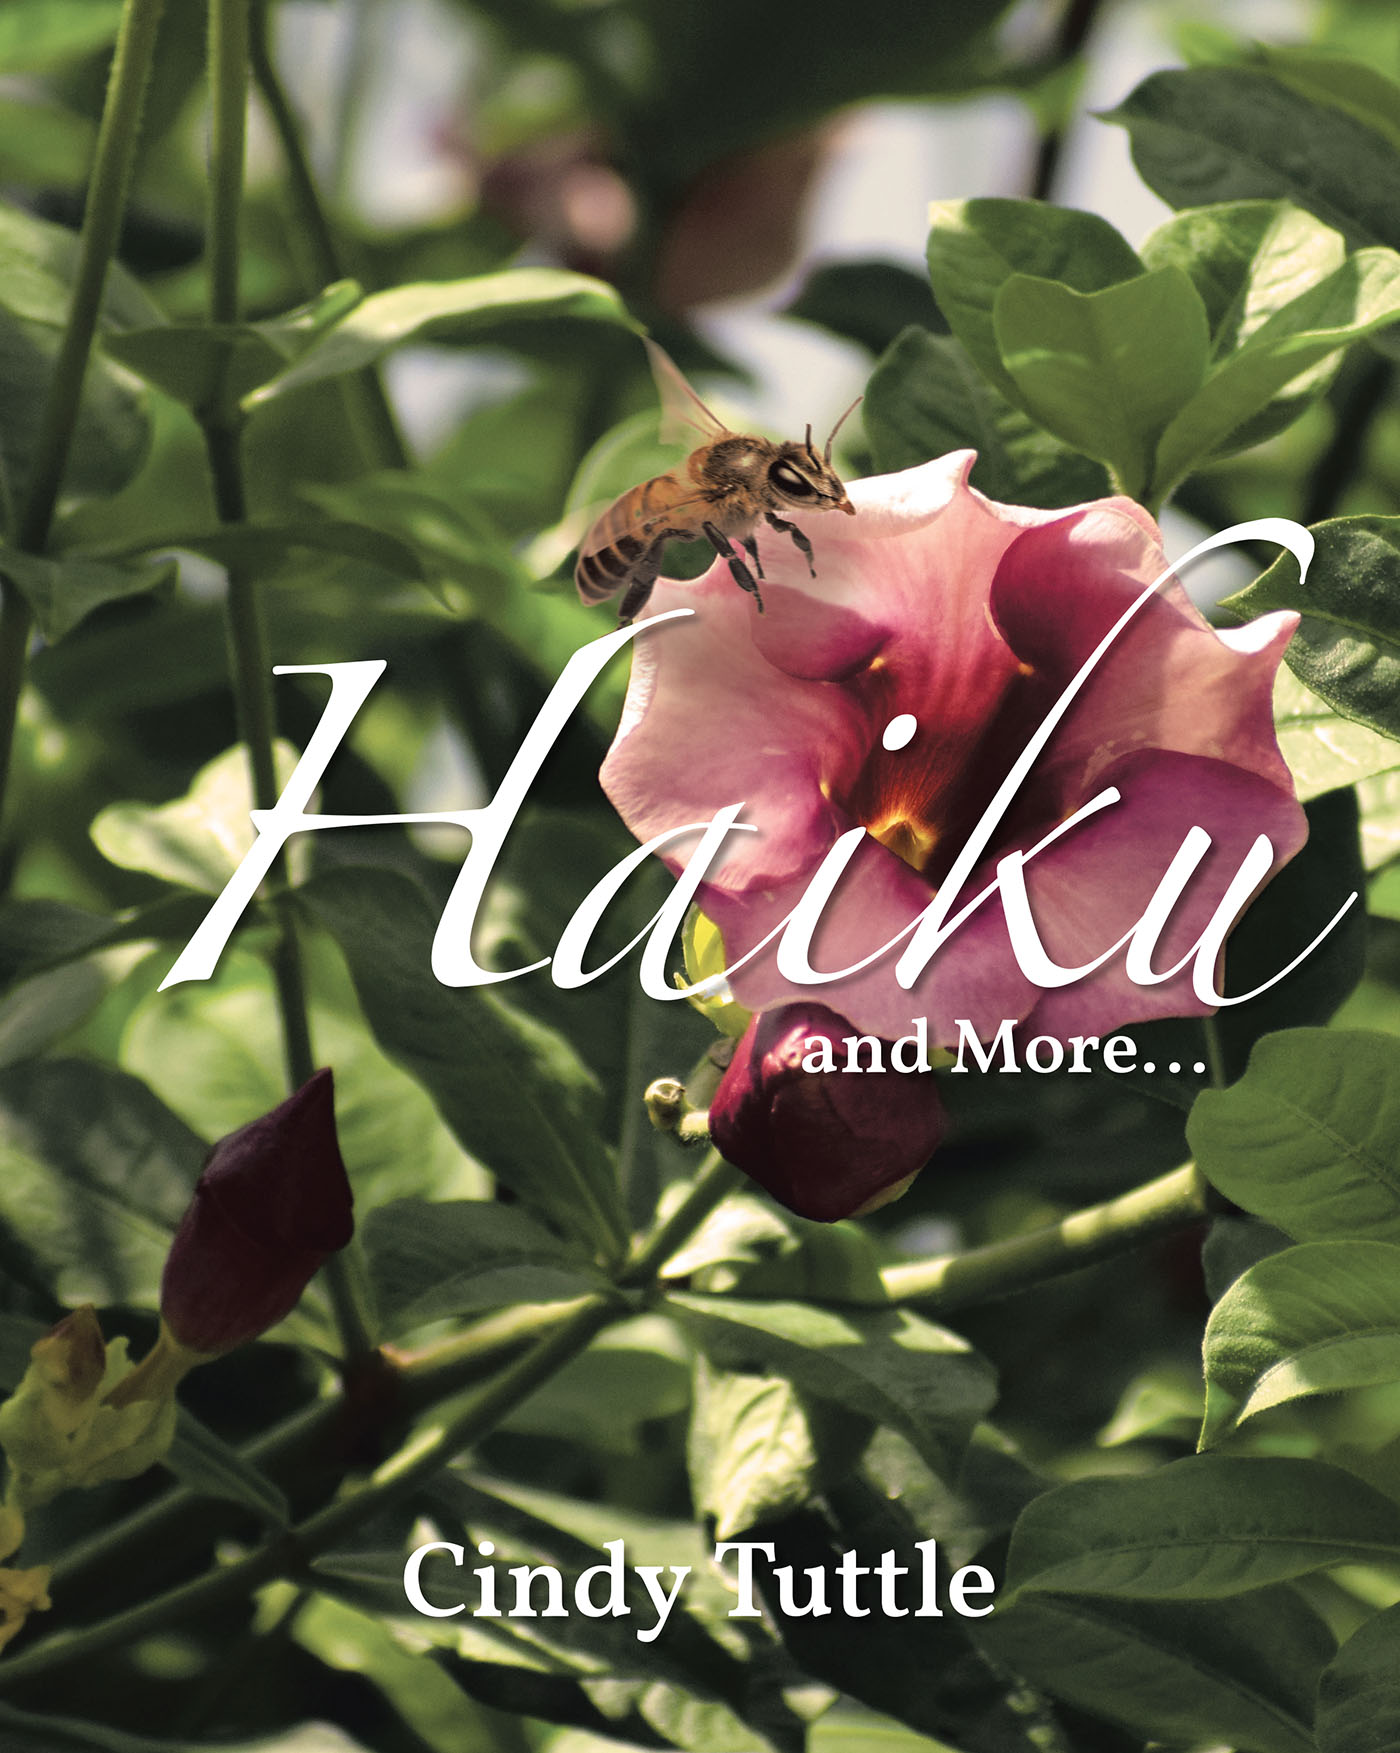 Cindy Tuttle’s Newly Released "Haiku and More" is a Tranquil Journey Through Moments of Serenity and Reflection